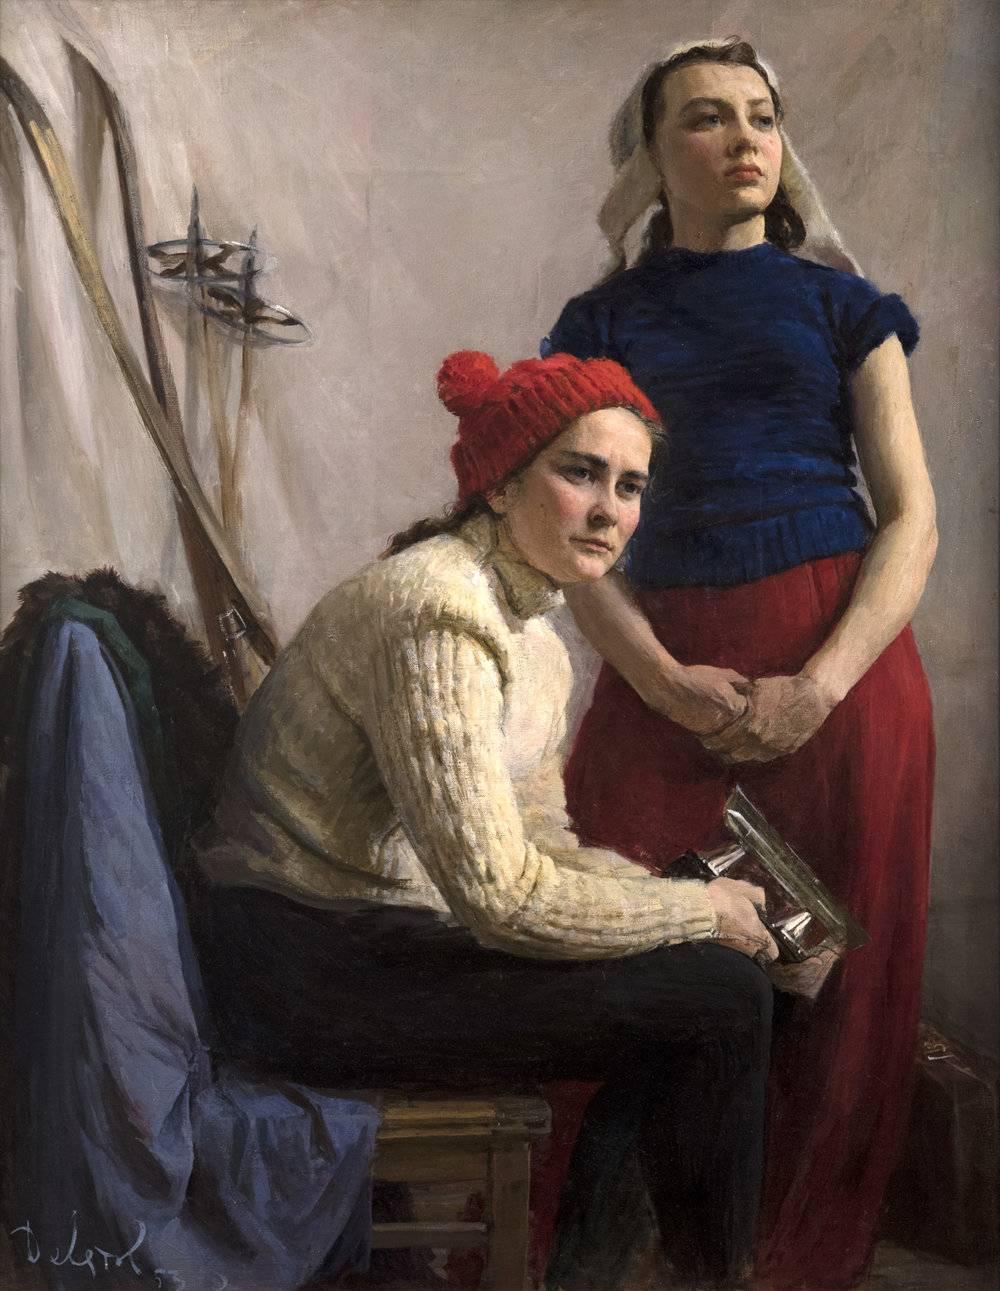 Simply titled "Athletes," this painting by Mikail Mkhailovich Devyatov captures the dignity and esteem of a female ice skater and skier. Russian female athletes were among the most pioneering in their fields, often given higher recognition